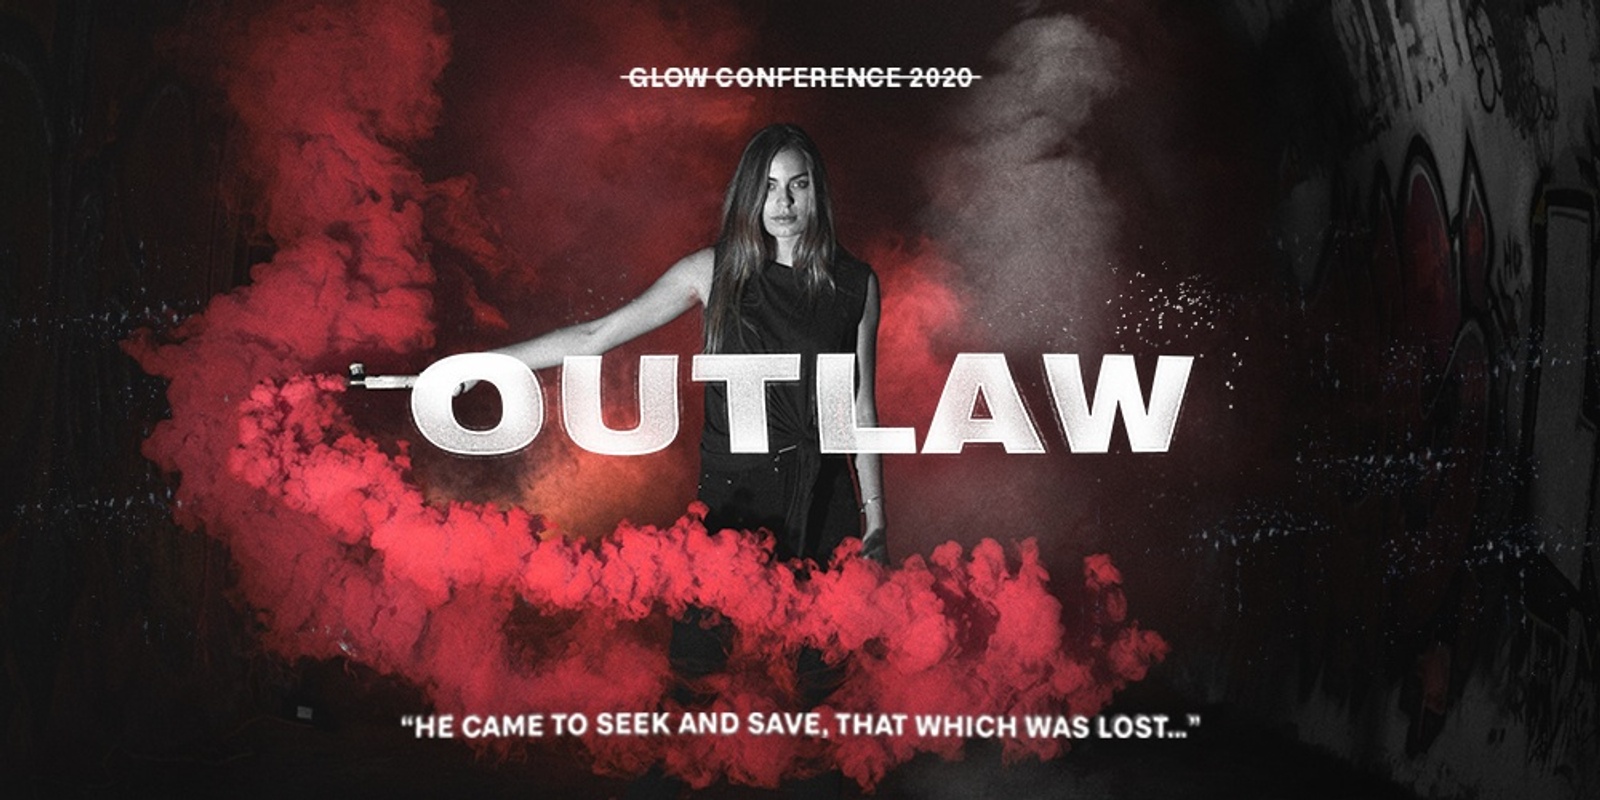 Banner image for Glow Conference - Outlaw